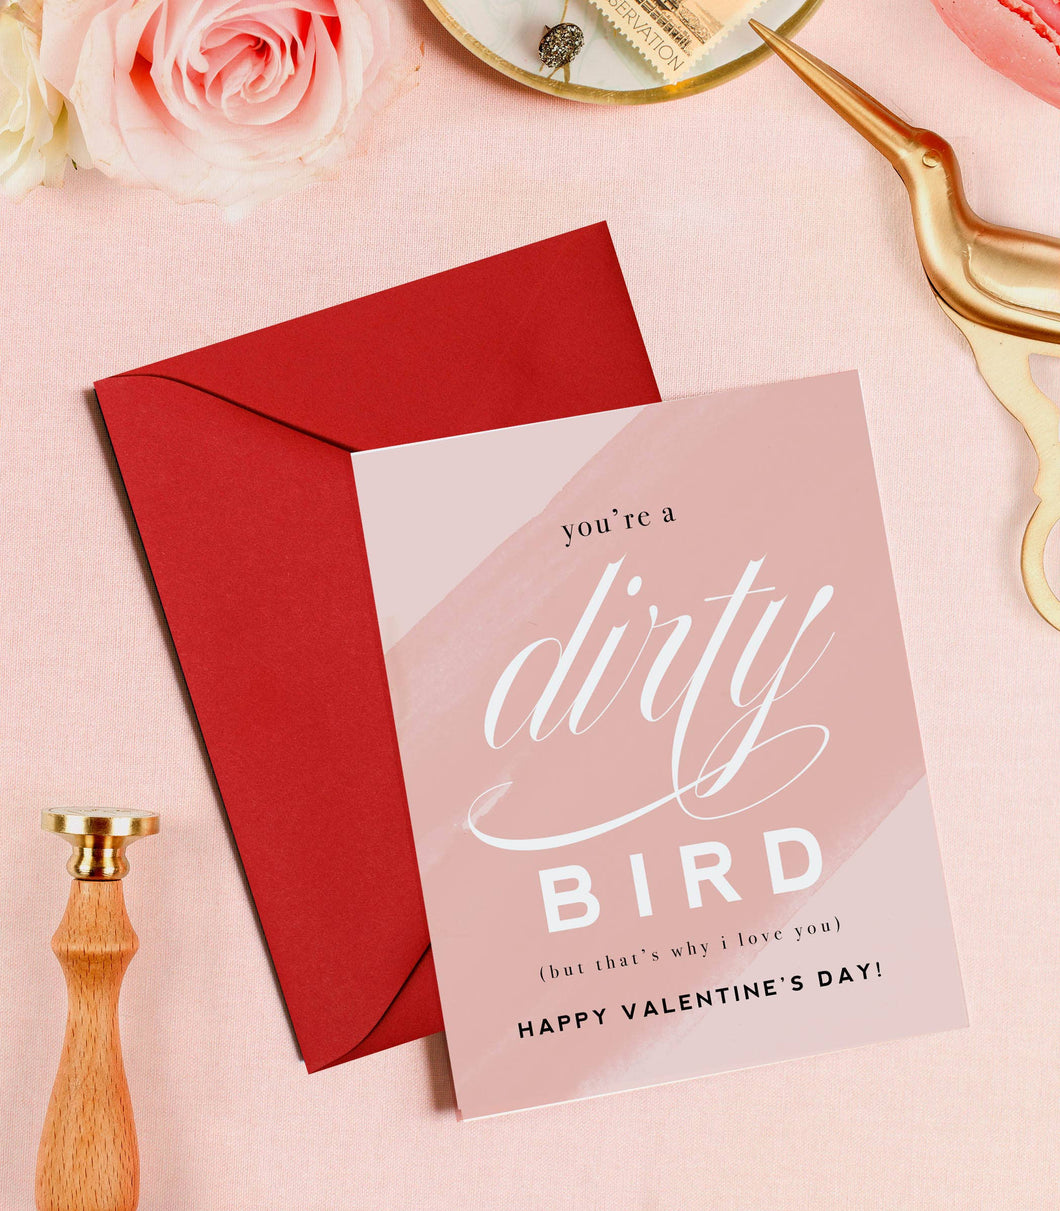 You're a Dirty Bird - Funny Valentine's Day Card